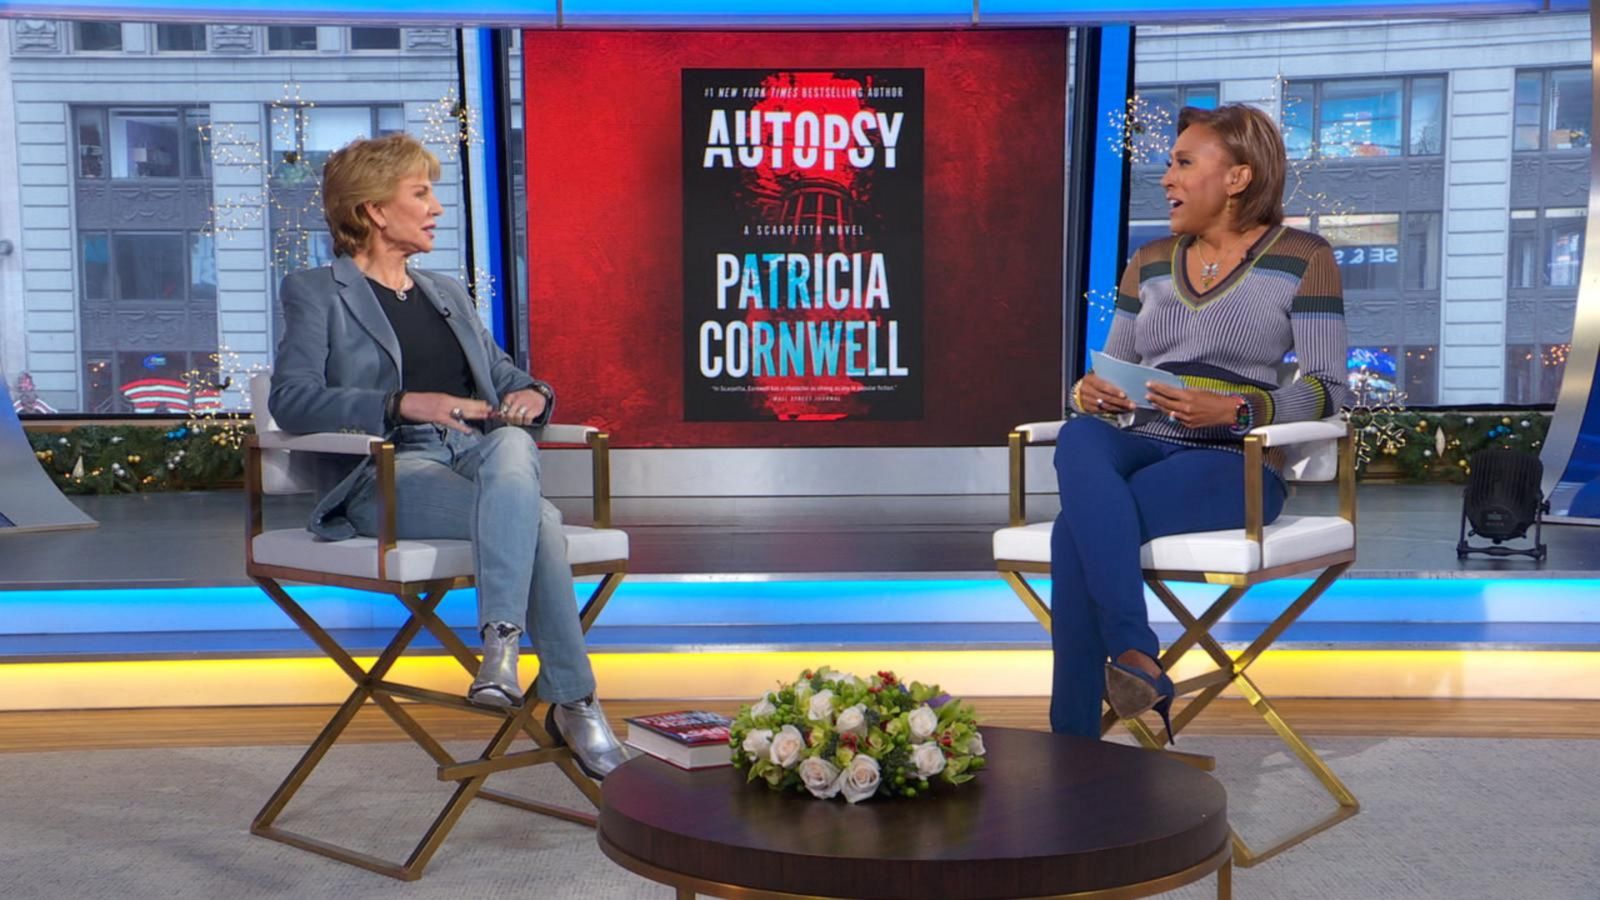 Patricia Cornwell talks about new book, ‘Autopsy’ Good Morning America